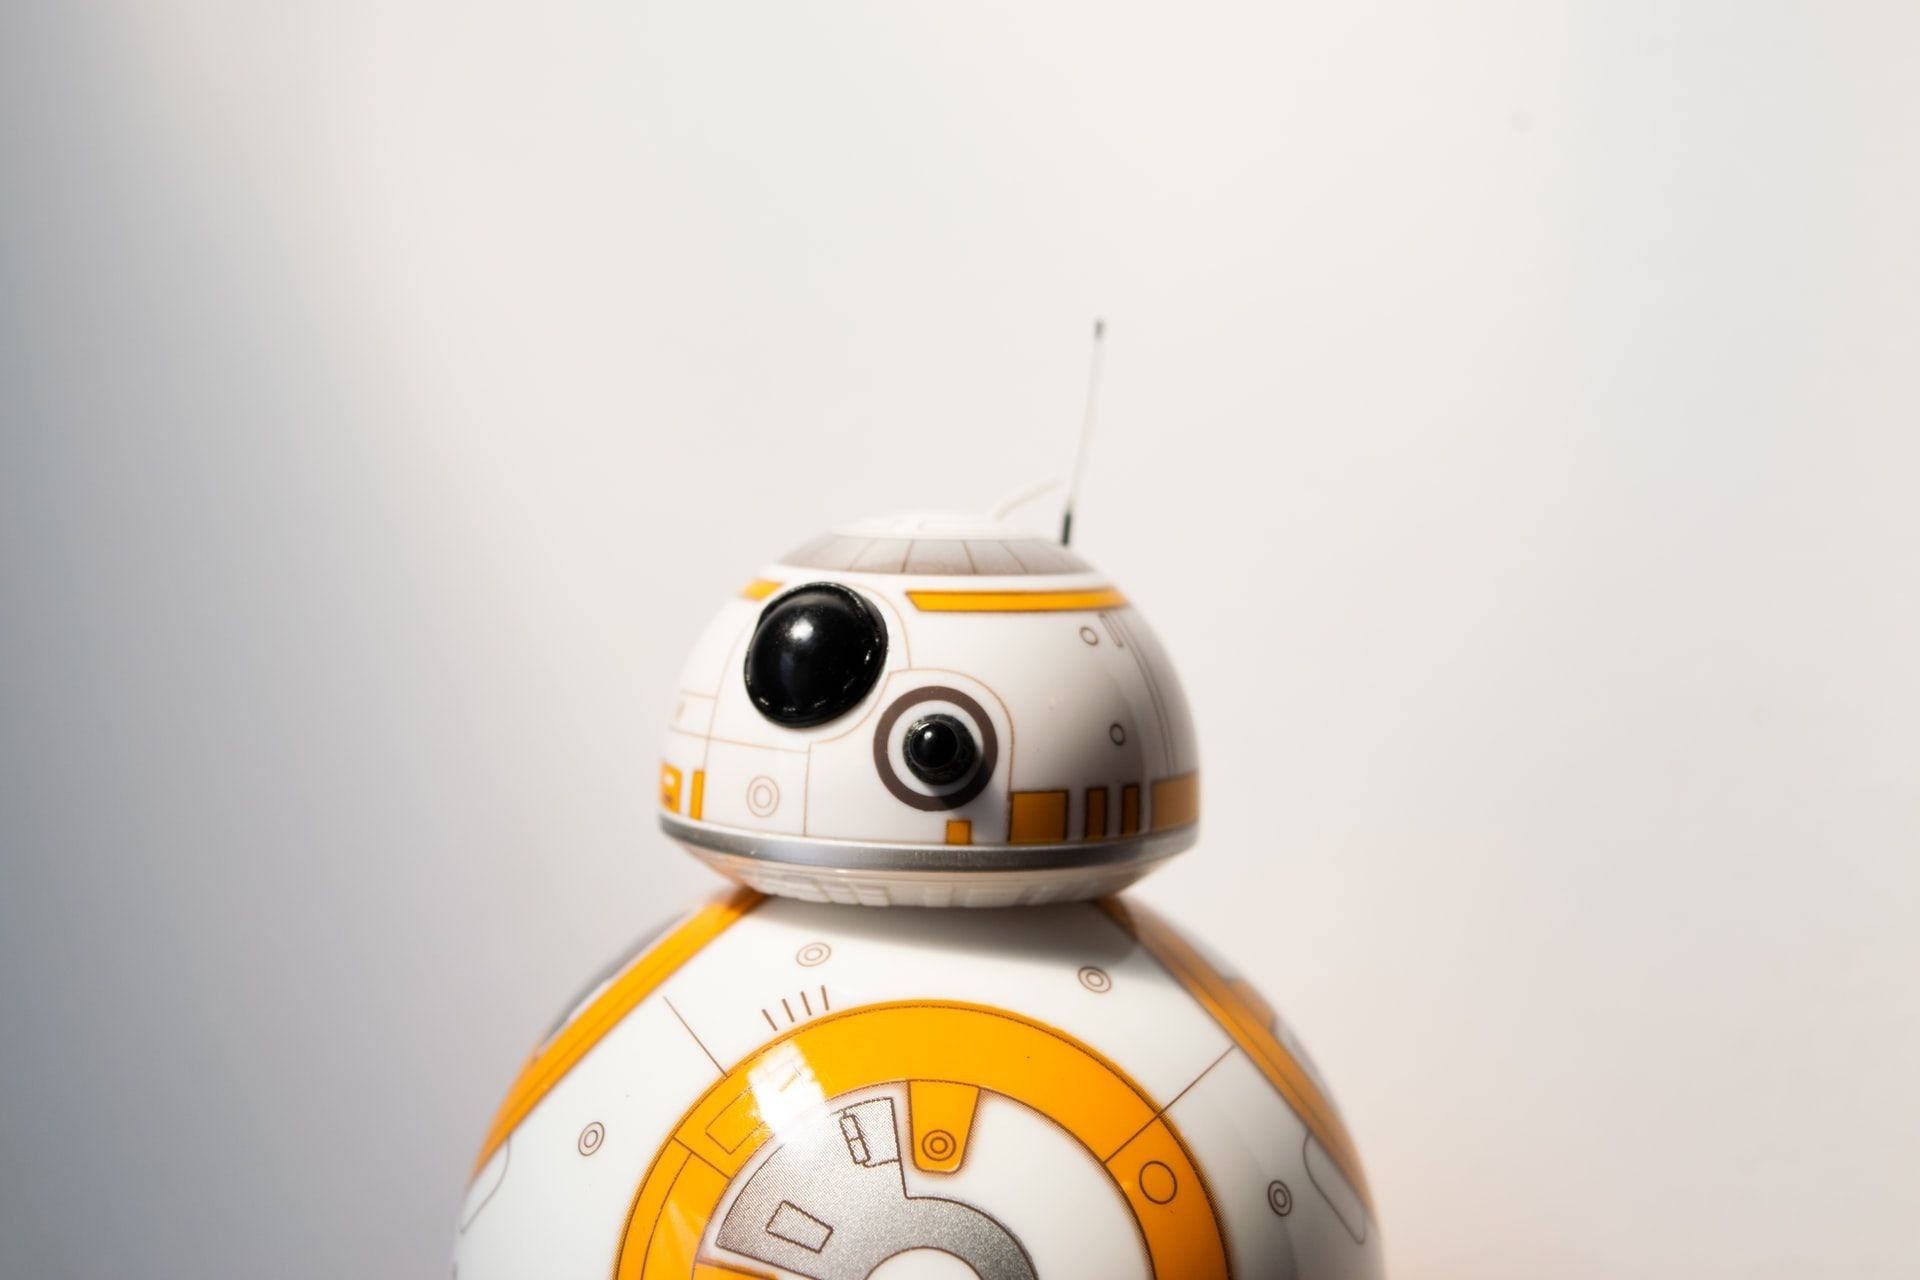 C3 PO and BB 8 are some of the well-known droids in the story.